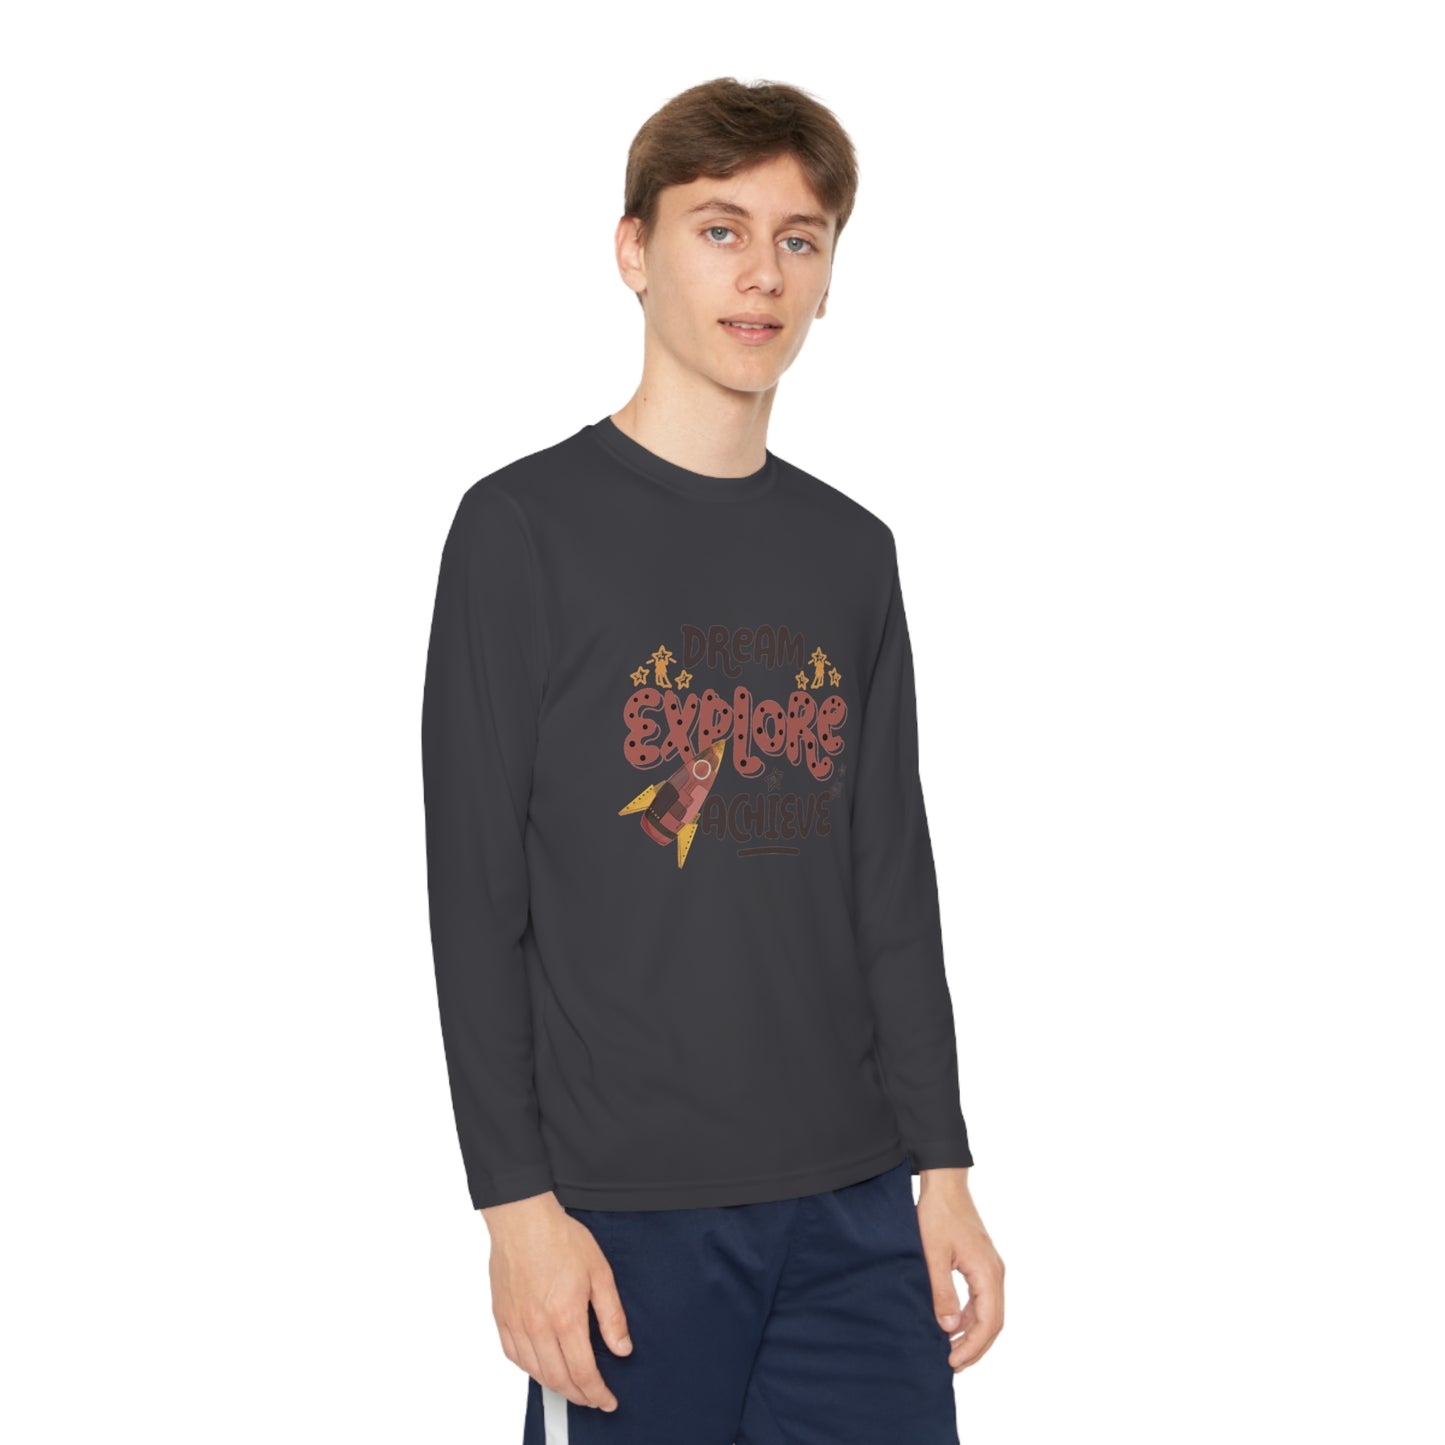 Youth Long Sleeve Competitor Tee - Dream, Explore, and Achieve